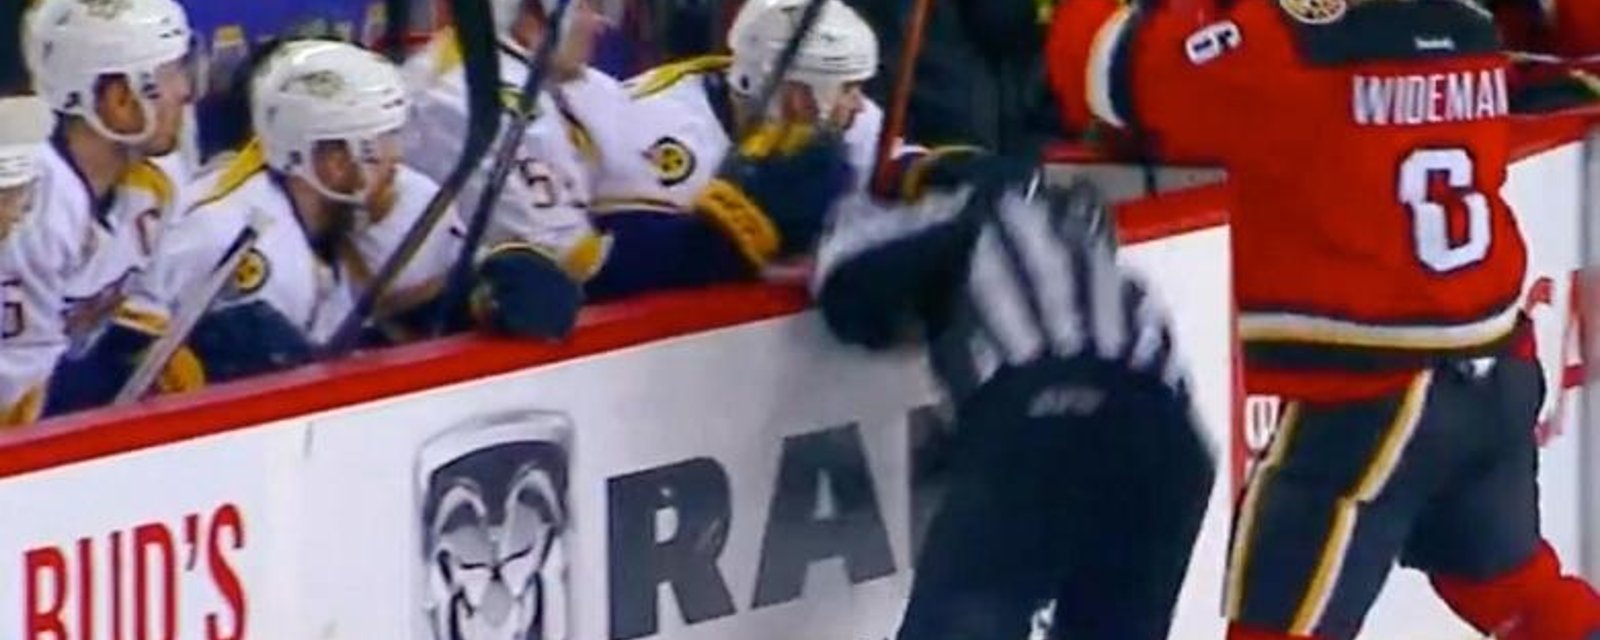 Both Wideman and NHL official Don Henderson suffered significant injuries.